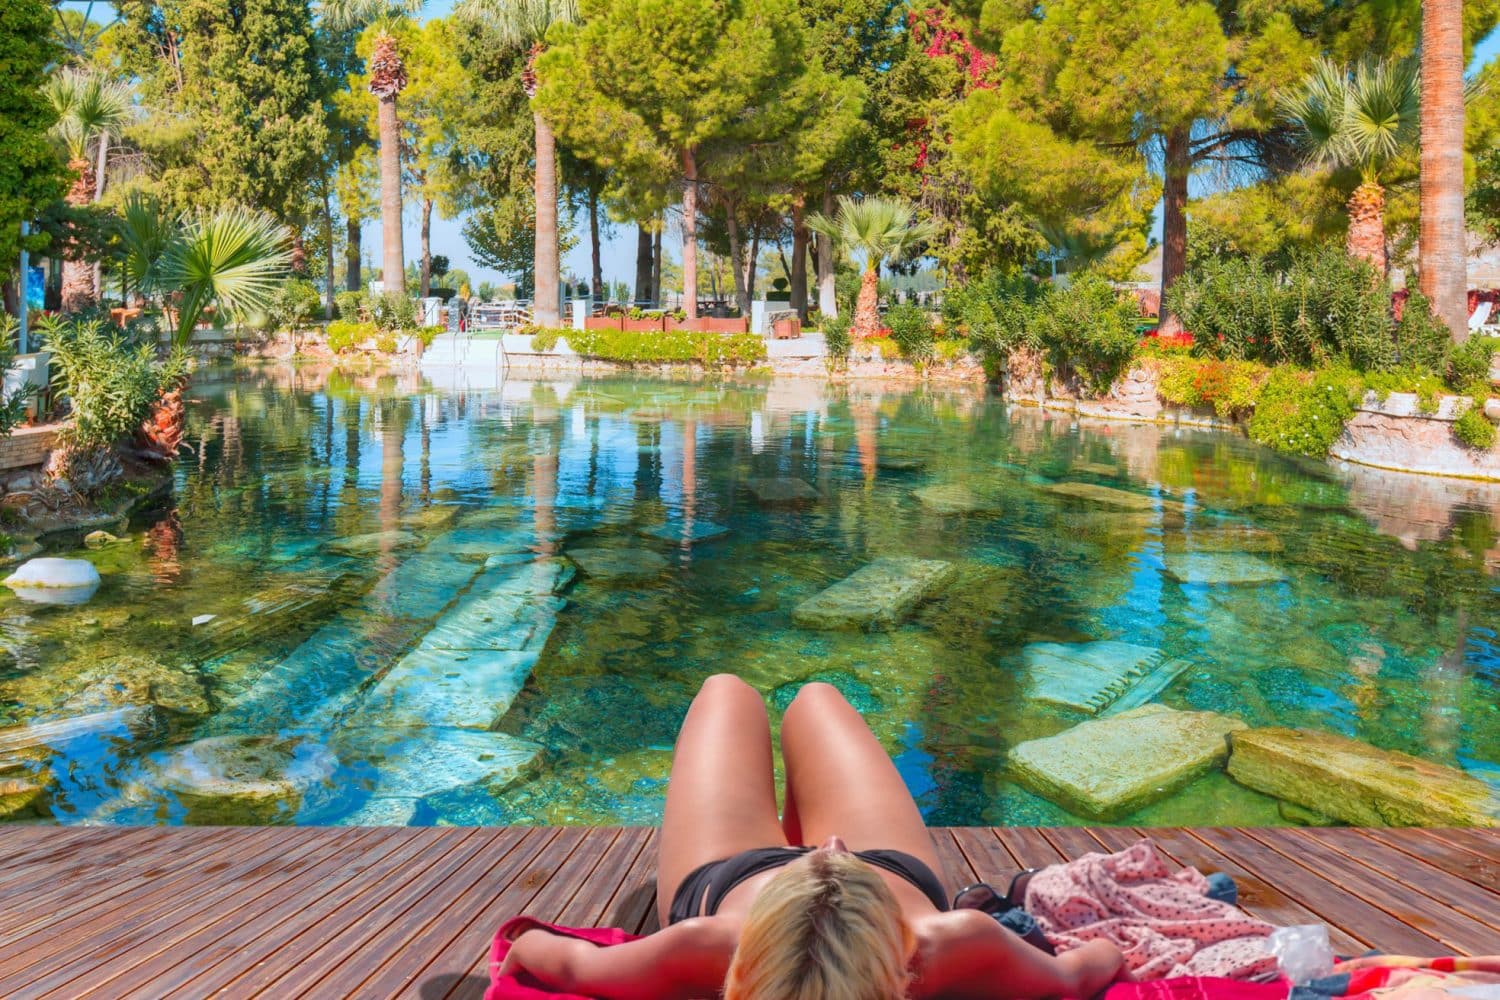 Sunbathing by the Cleopatra Pool in Pamukkale